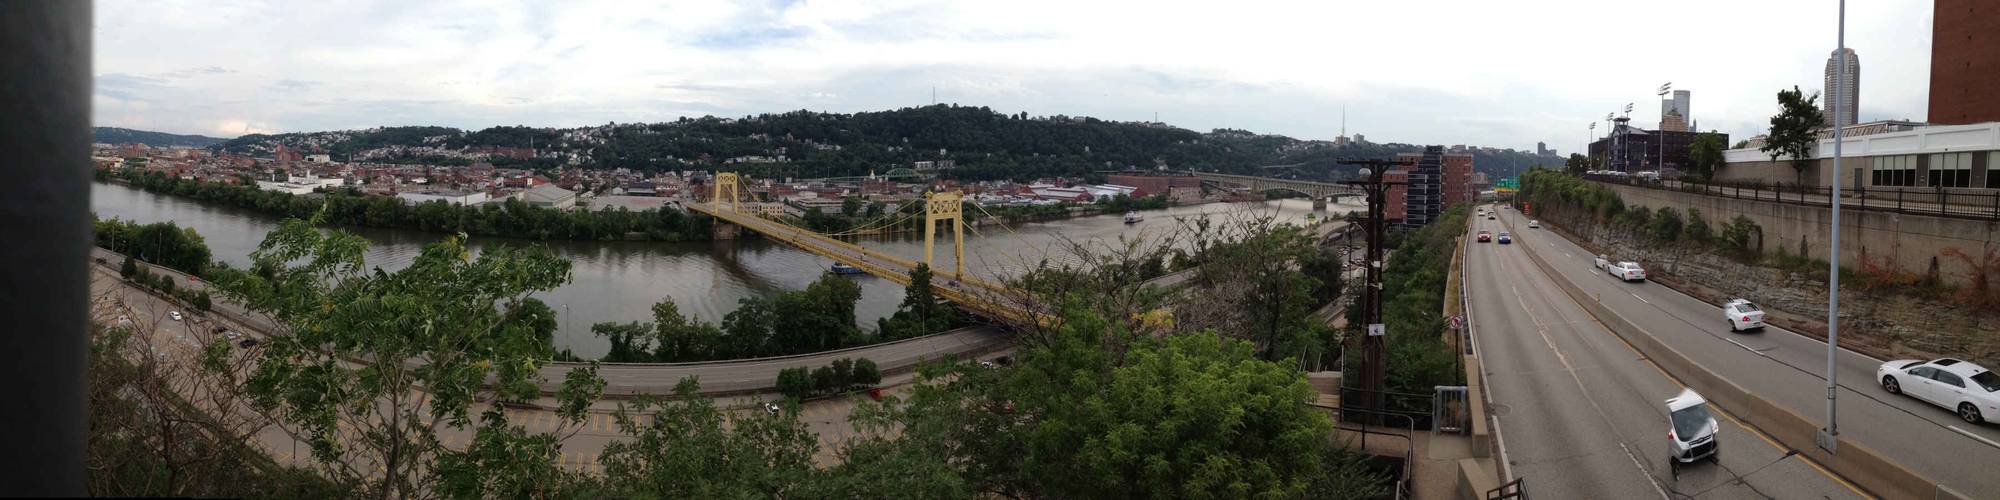 Another panorama of South Pittsburgh